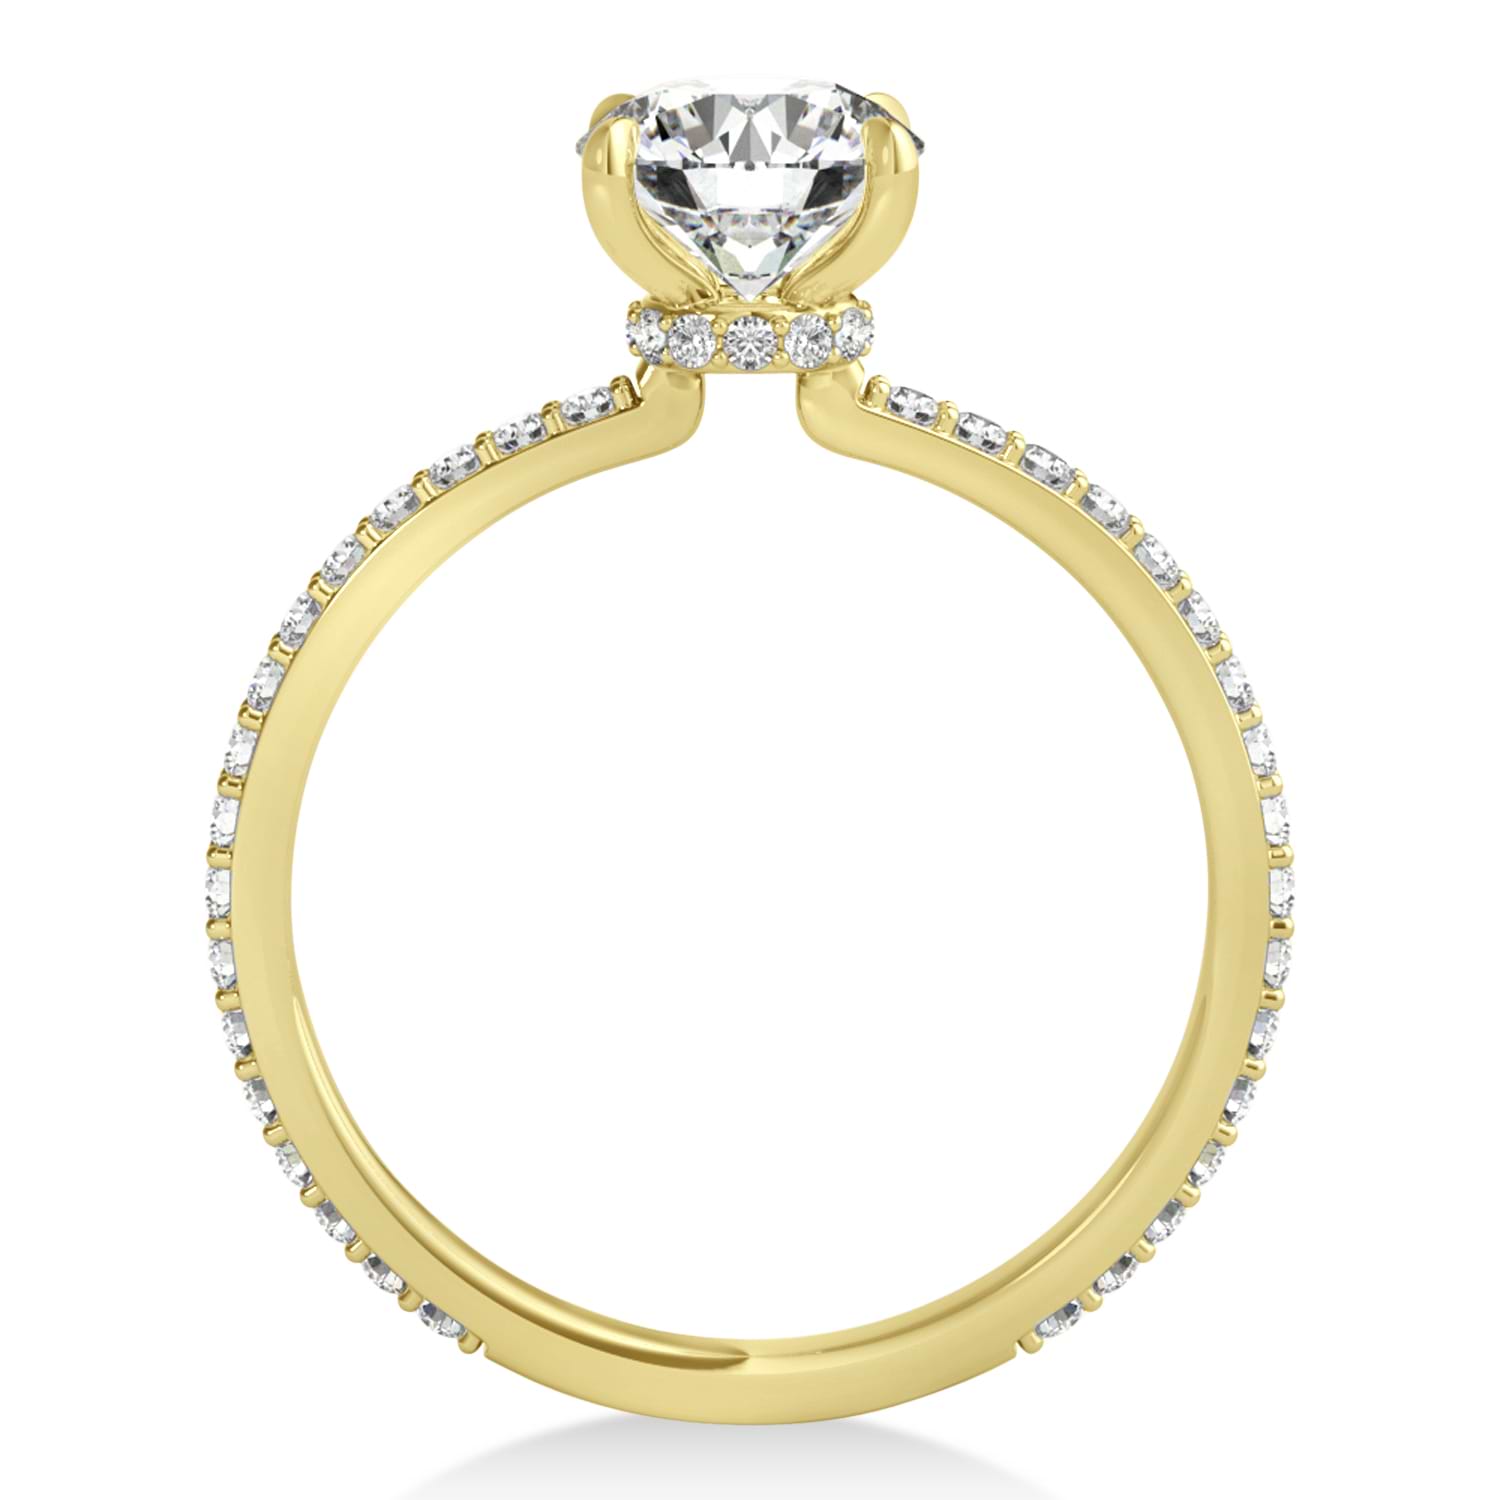 Oval Lab Grown Diamond Hidden Halo Engagement Ring 14k Yellow Gold (1.50ct)